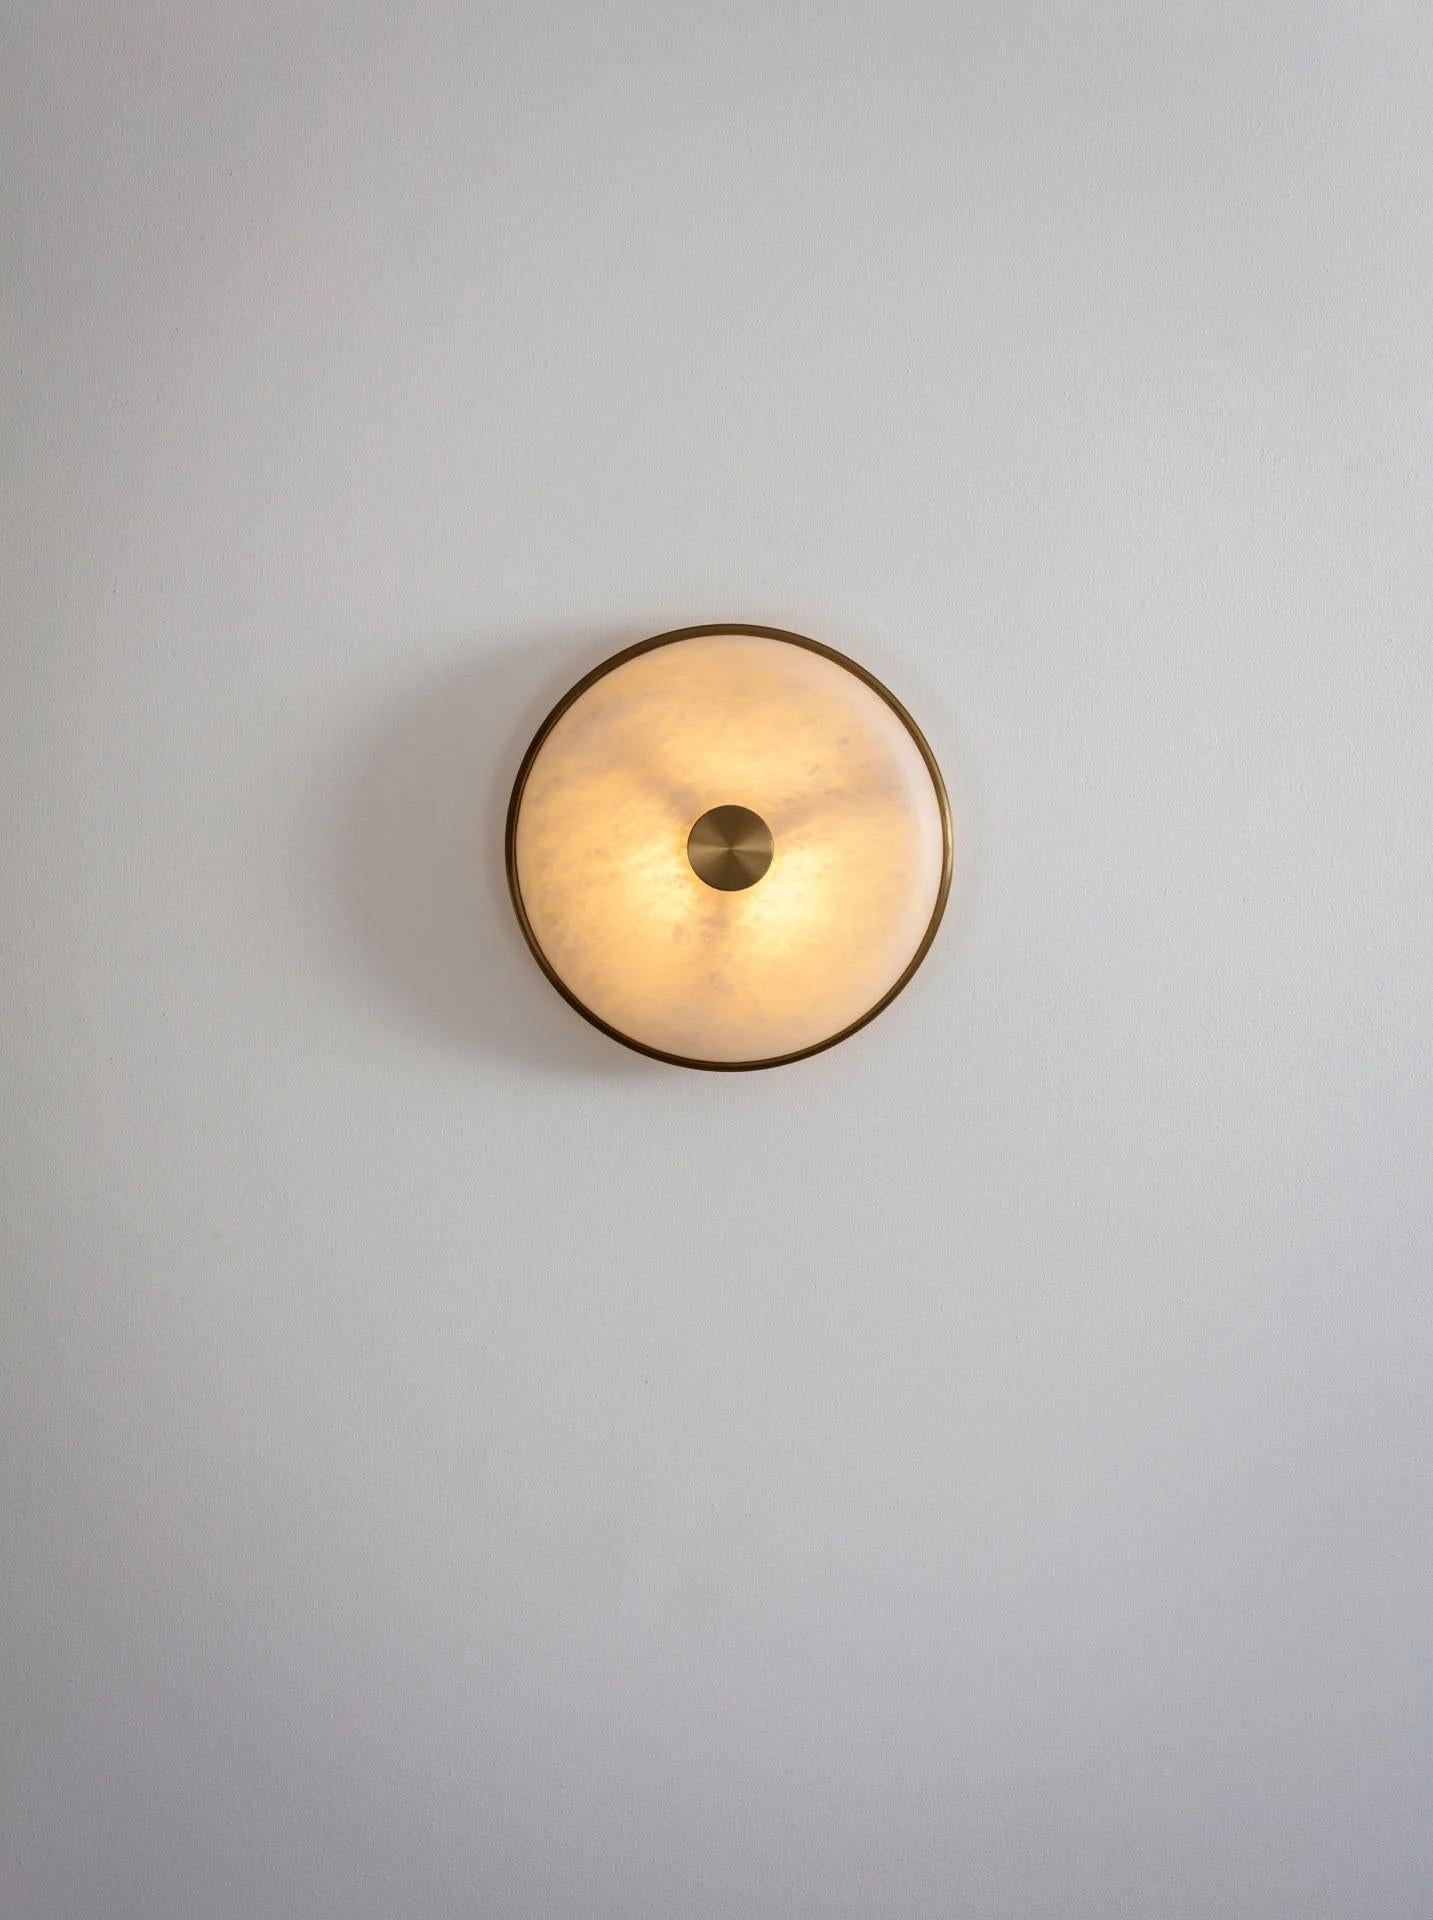 Beran Antique Brass Small Wall Light by Bert Frank
Dimensions: D 6,5 x W 26 x H 26 cm.
Materials: Brass and alabaster.

Available in two different sizes. Available in different finishes and materials. Please contact us. 

Simple and elegant in form,